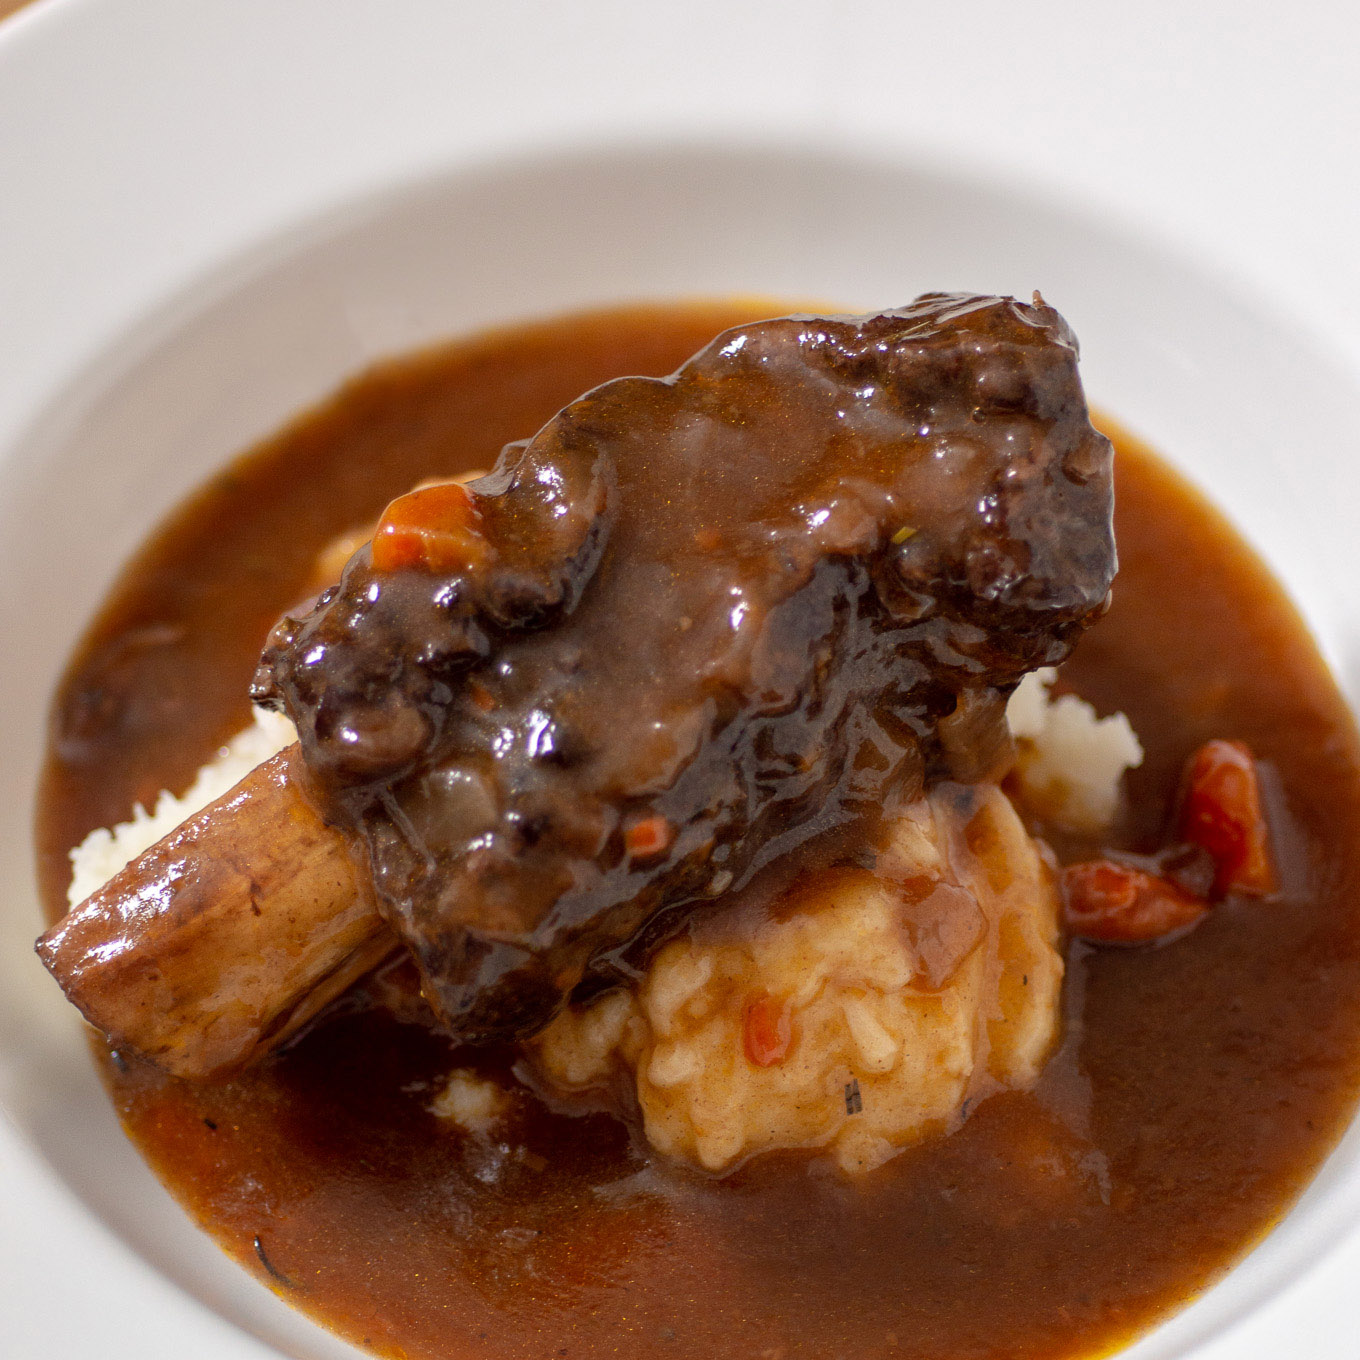 A short rib on the bone over mashed potatoes with gravy.